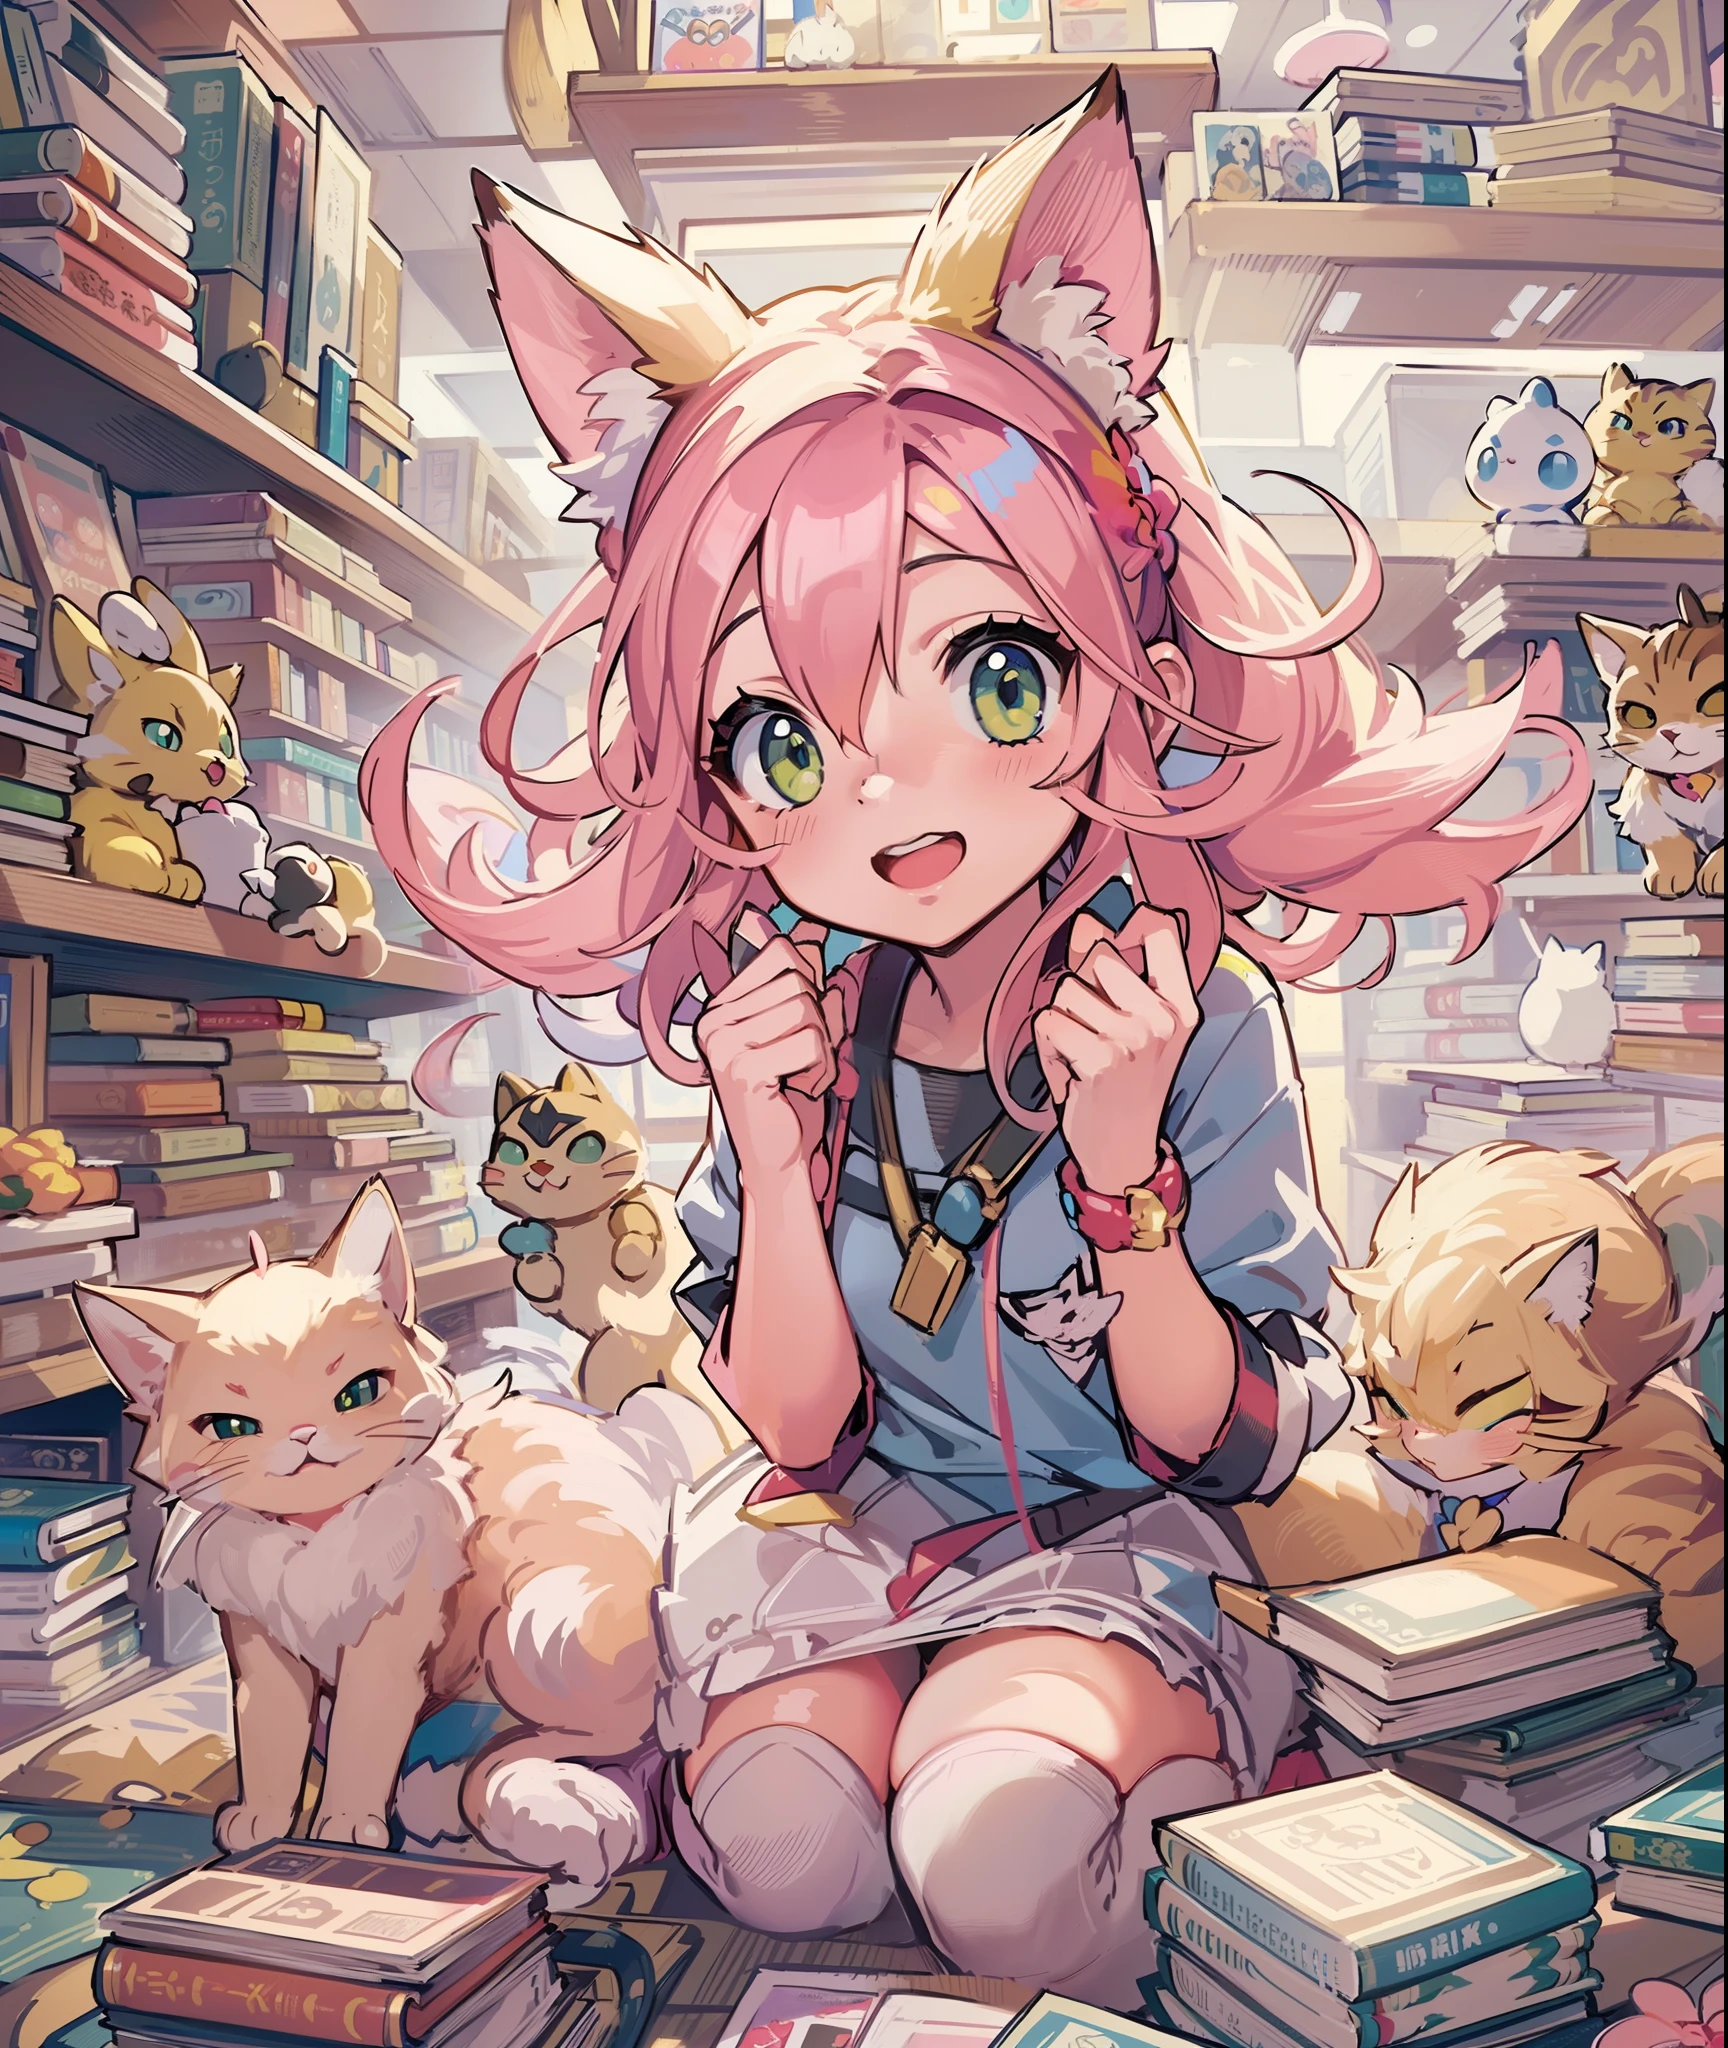 1girl in,A pokémon_The card,(Best quality1.２), (hightquality), (Convoluted_Details), (ultra-detailliert), (illustratio), (Distinct_image),With cats((1 With cute cats.5)),((Pink hair))、bookstore